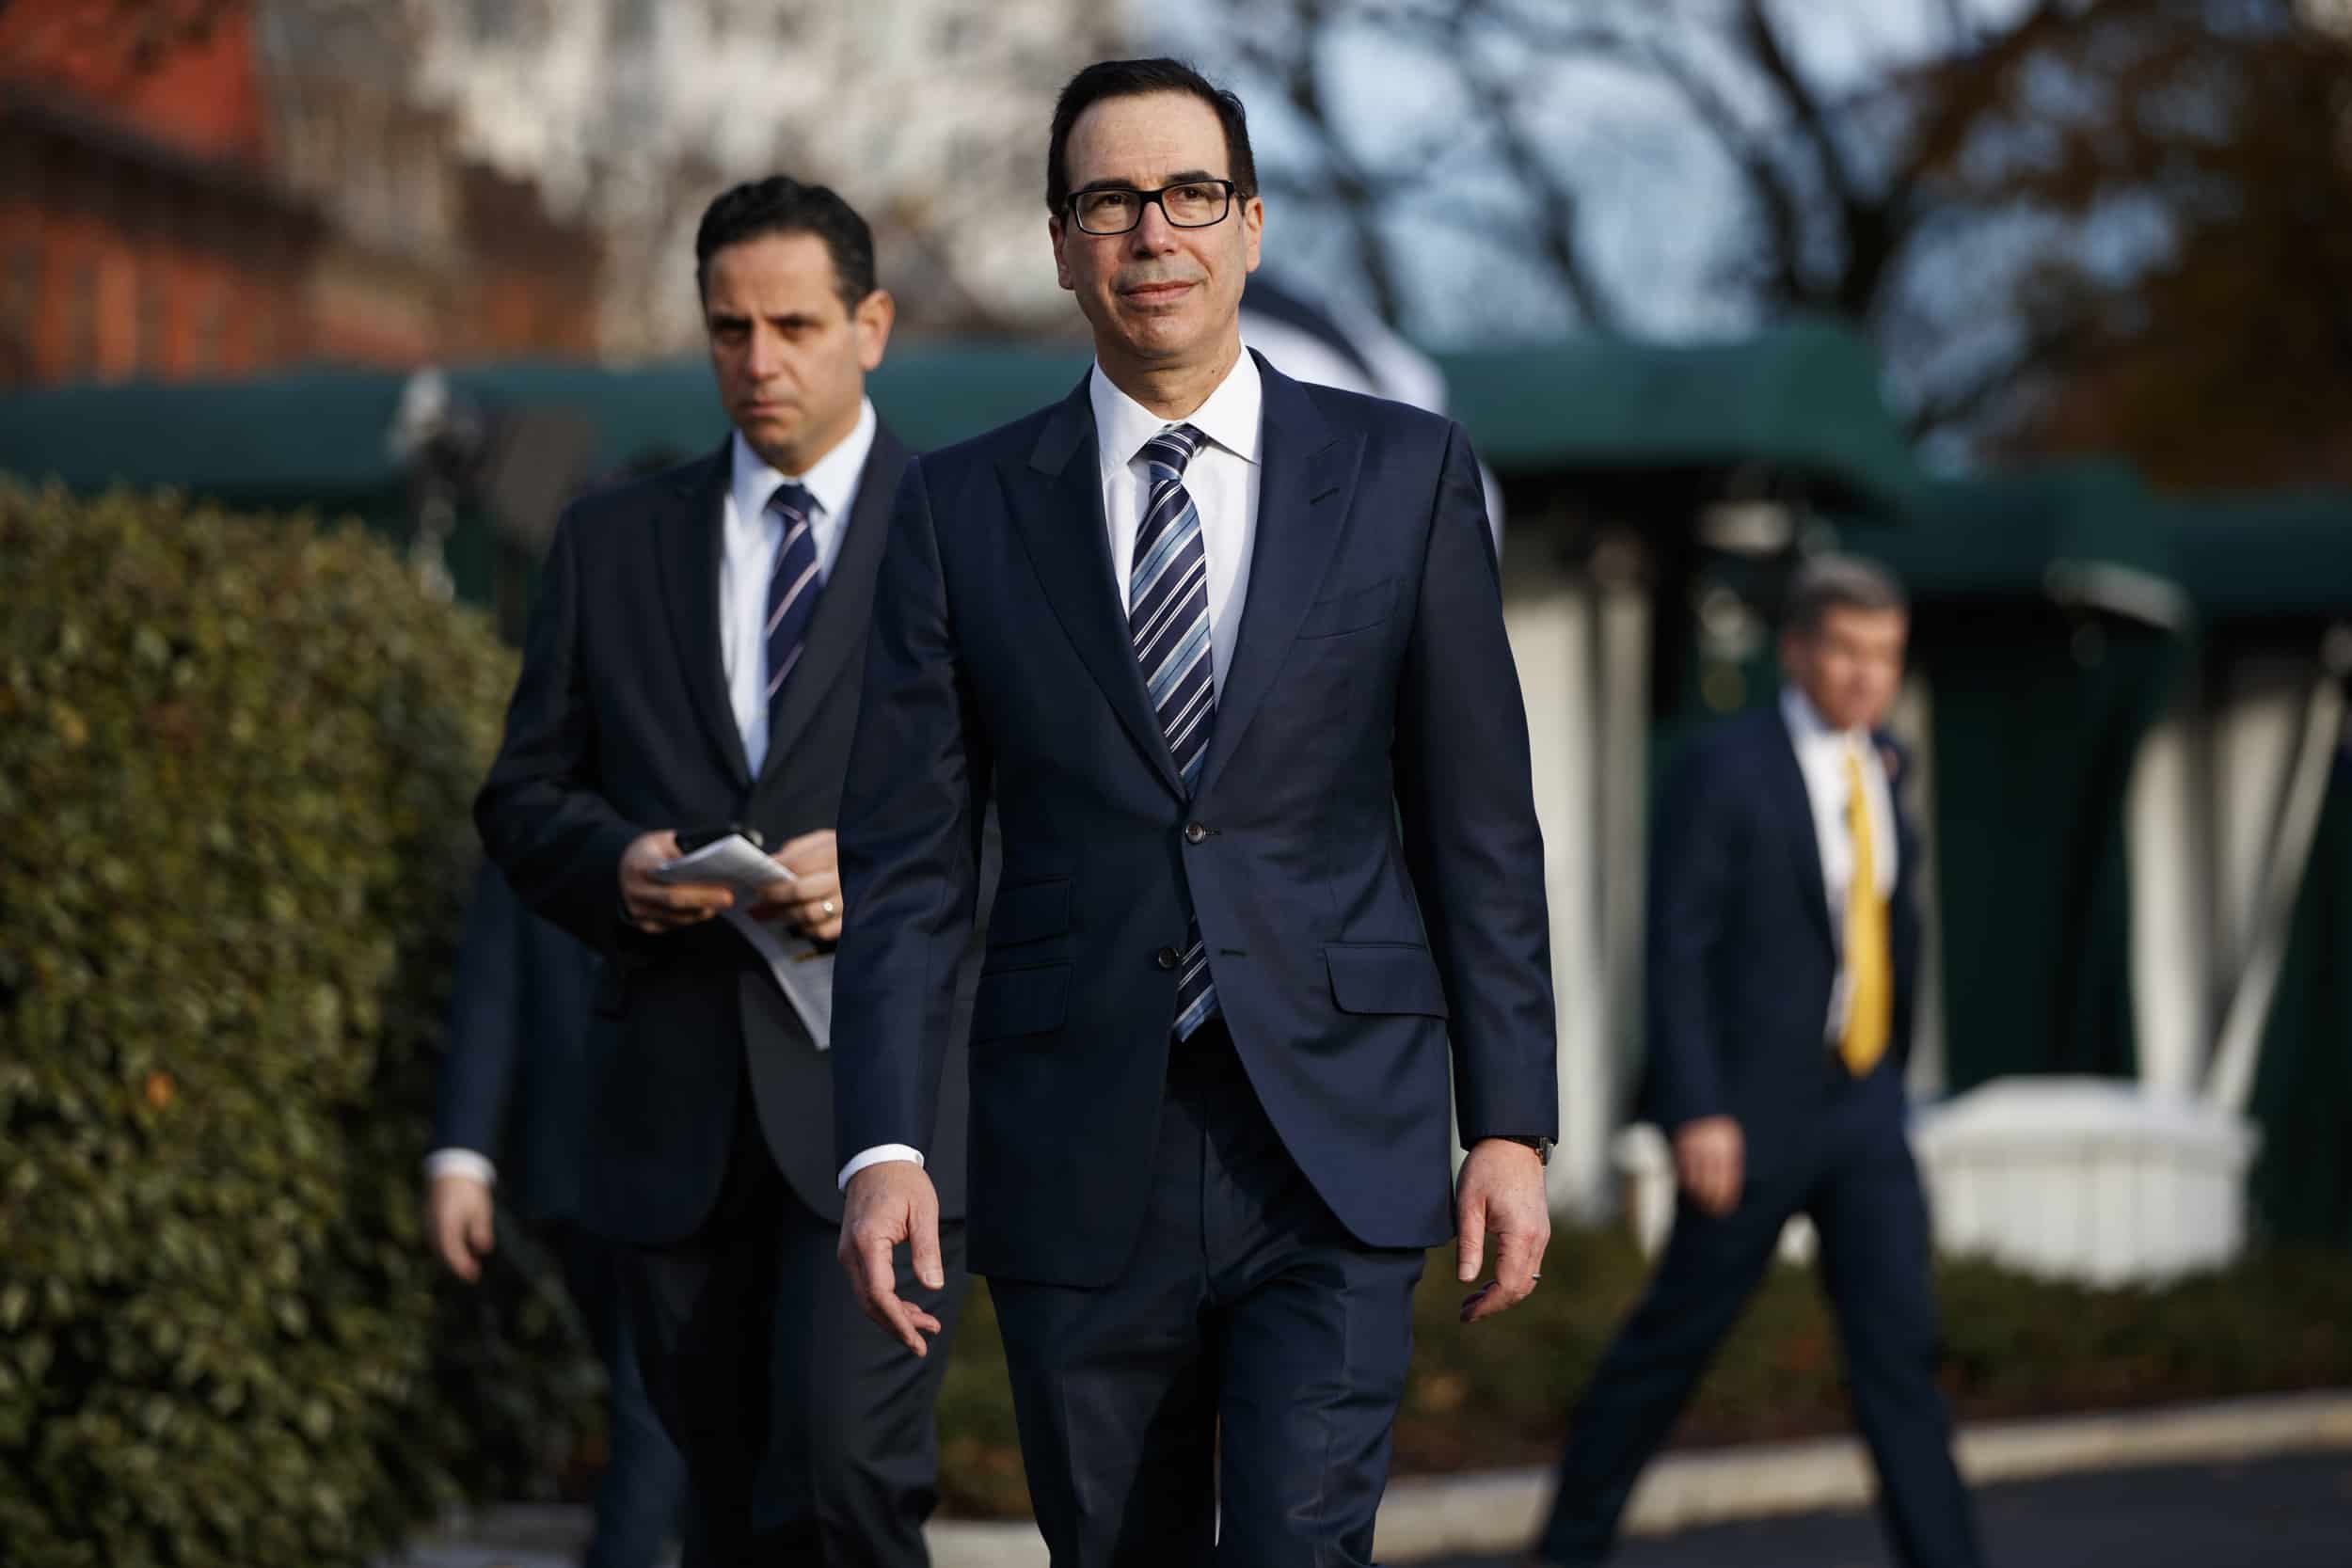 Steven Mnuchin Announces Expected Growth in the 3rd Quarter